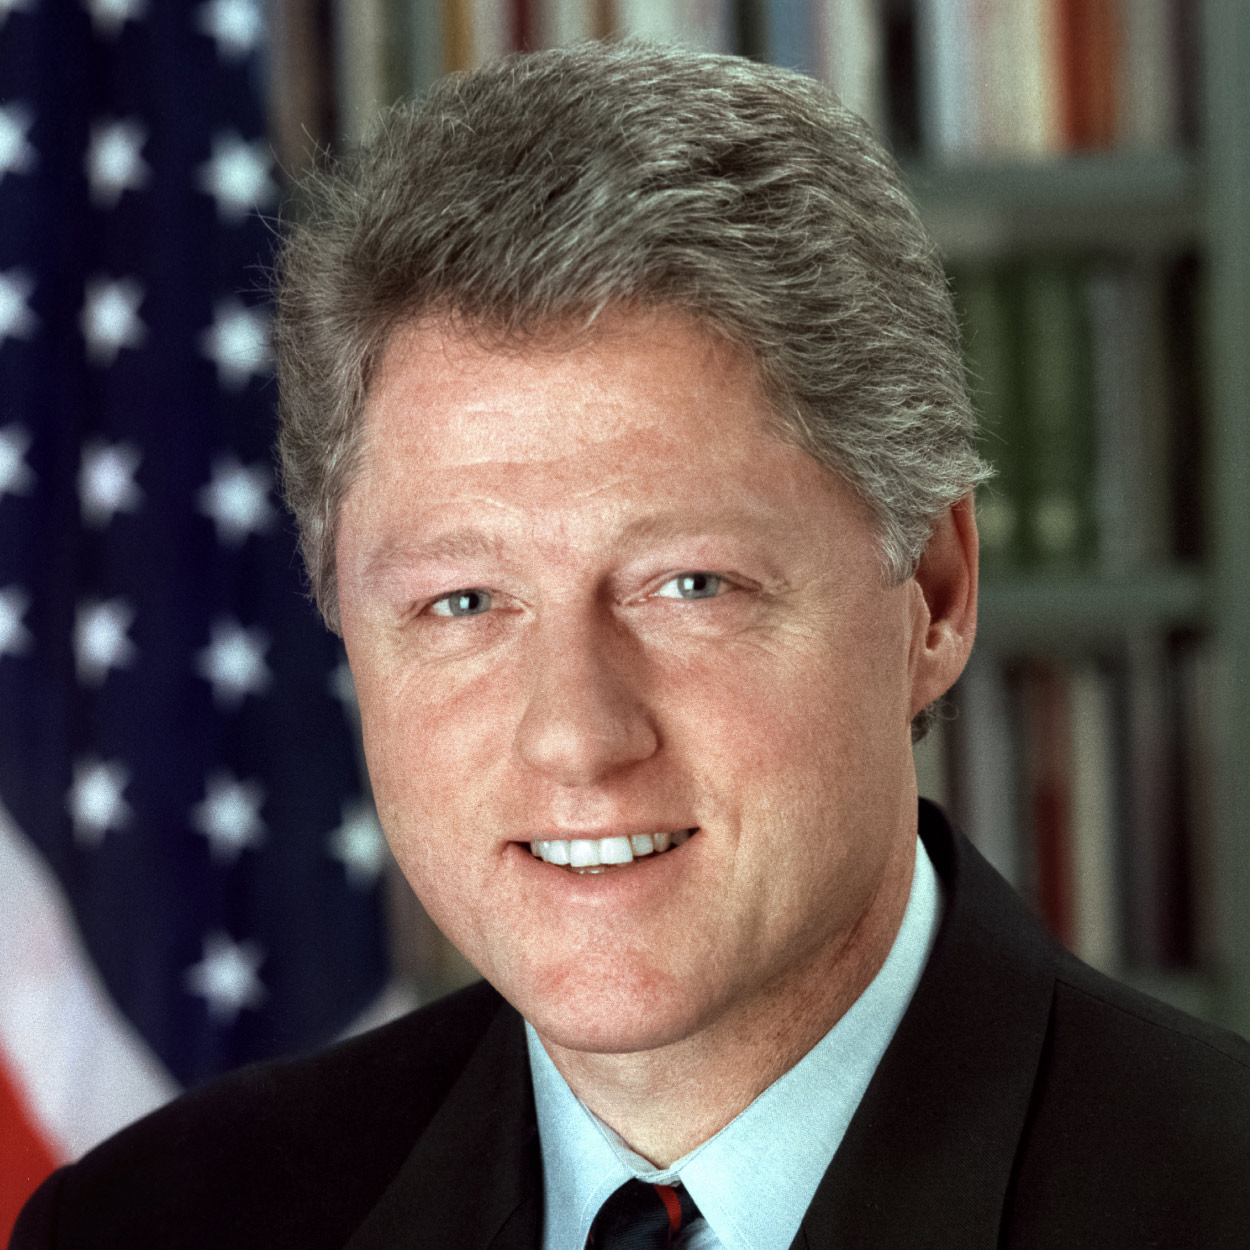 taille-bill-clinton-Image